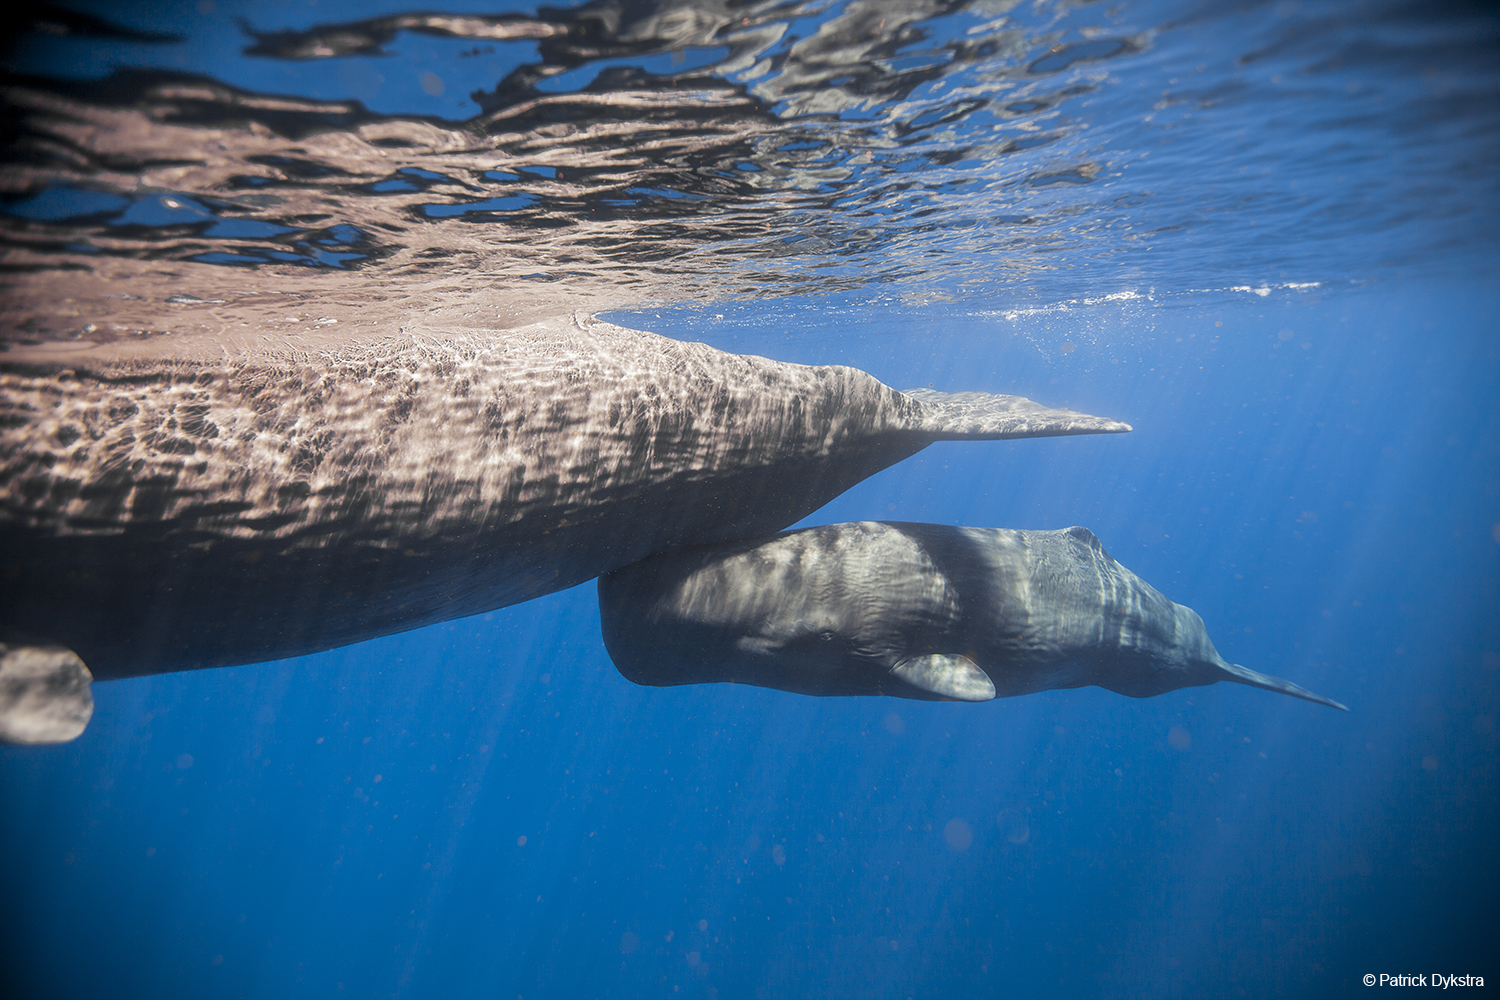 A mother sperm whale and her baby under water